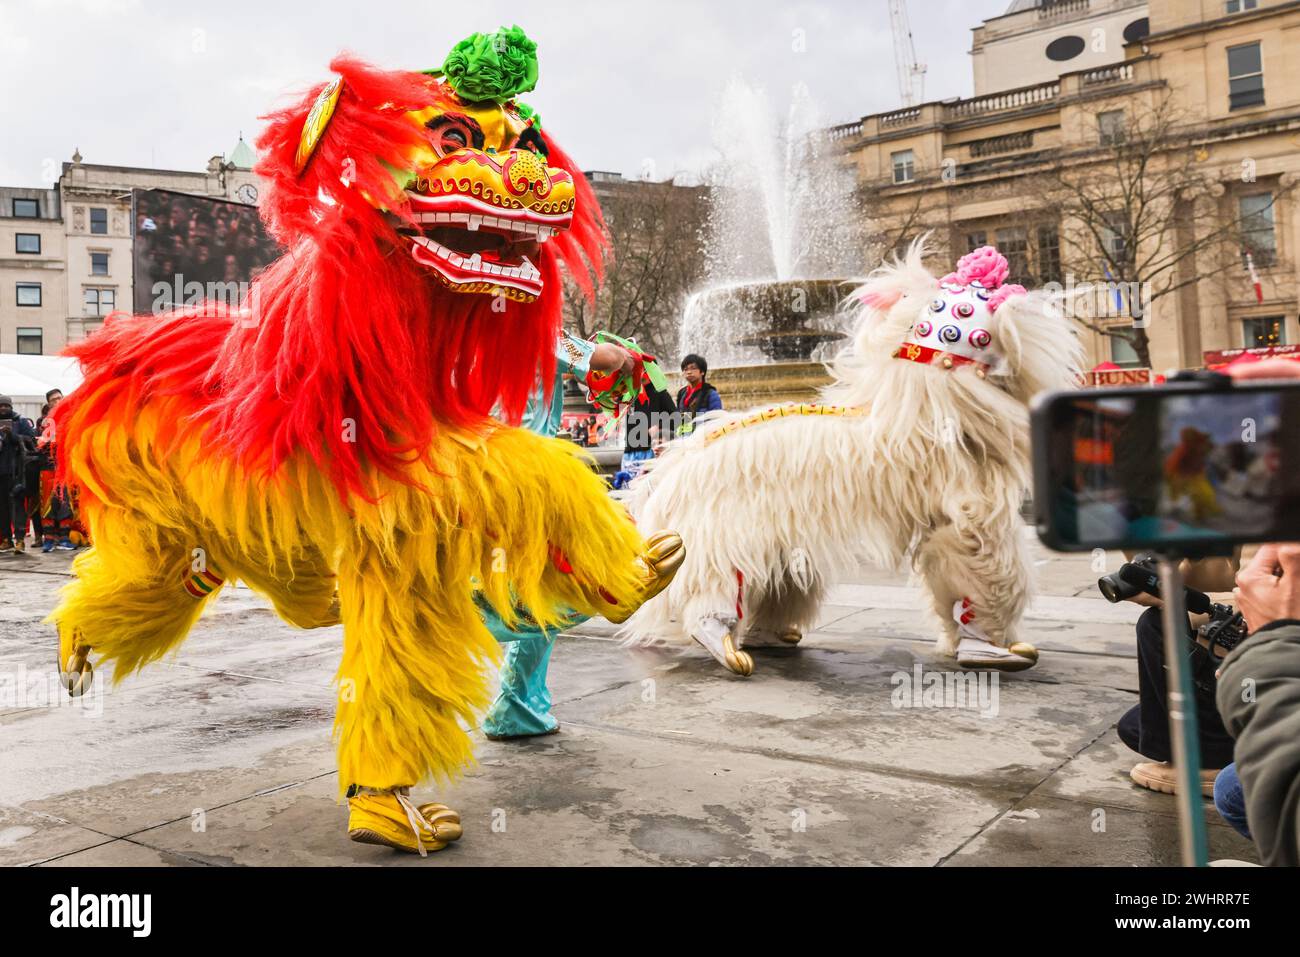 London, UK. 11th Feb, 2024. Festivities for the Chinese New Year on Trafalgar Square. The programme includes lion dance performances (pictured) as well as stalls and activities on the square. 2024 is the Year of the Dragon in the Chinese calendar. The London festivities are amongst the largest Lunar New Year celebrations outside China. Credit: Imageplotter/Alamy Live News Stock Photo